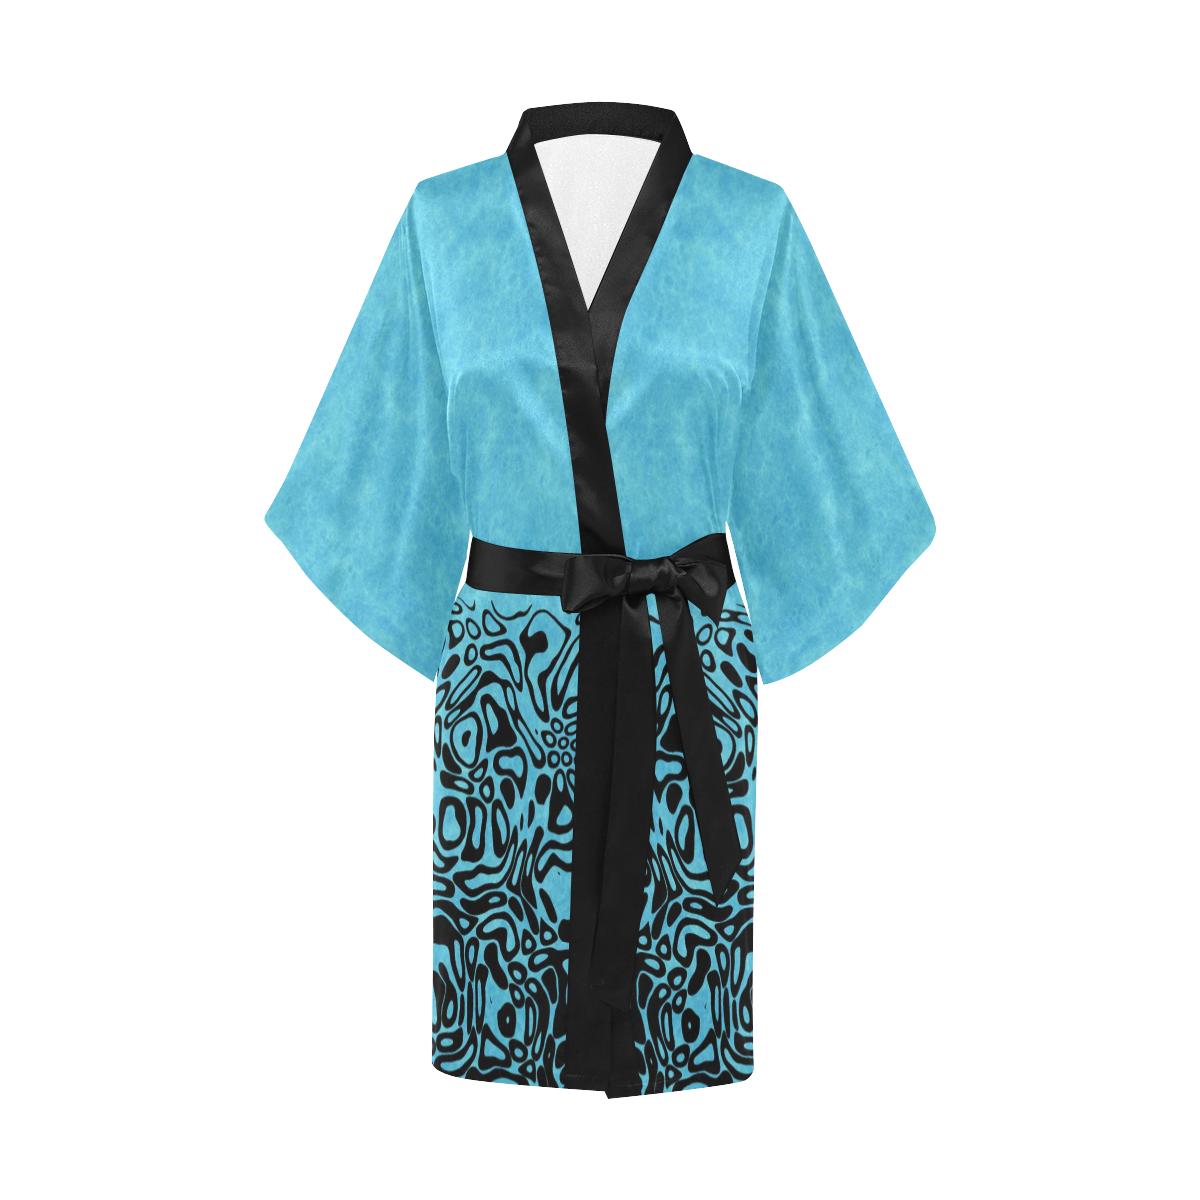 Modern PaperPrint turquoise by JamColors Kimono Robe